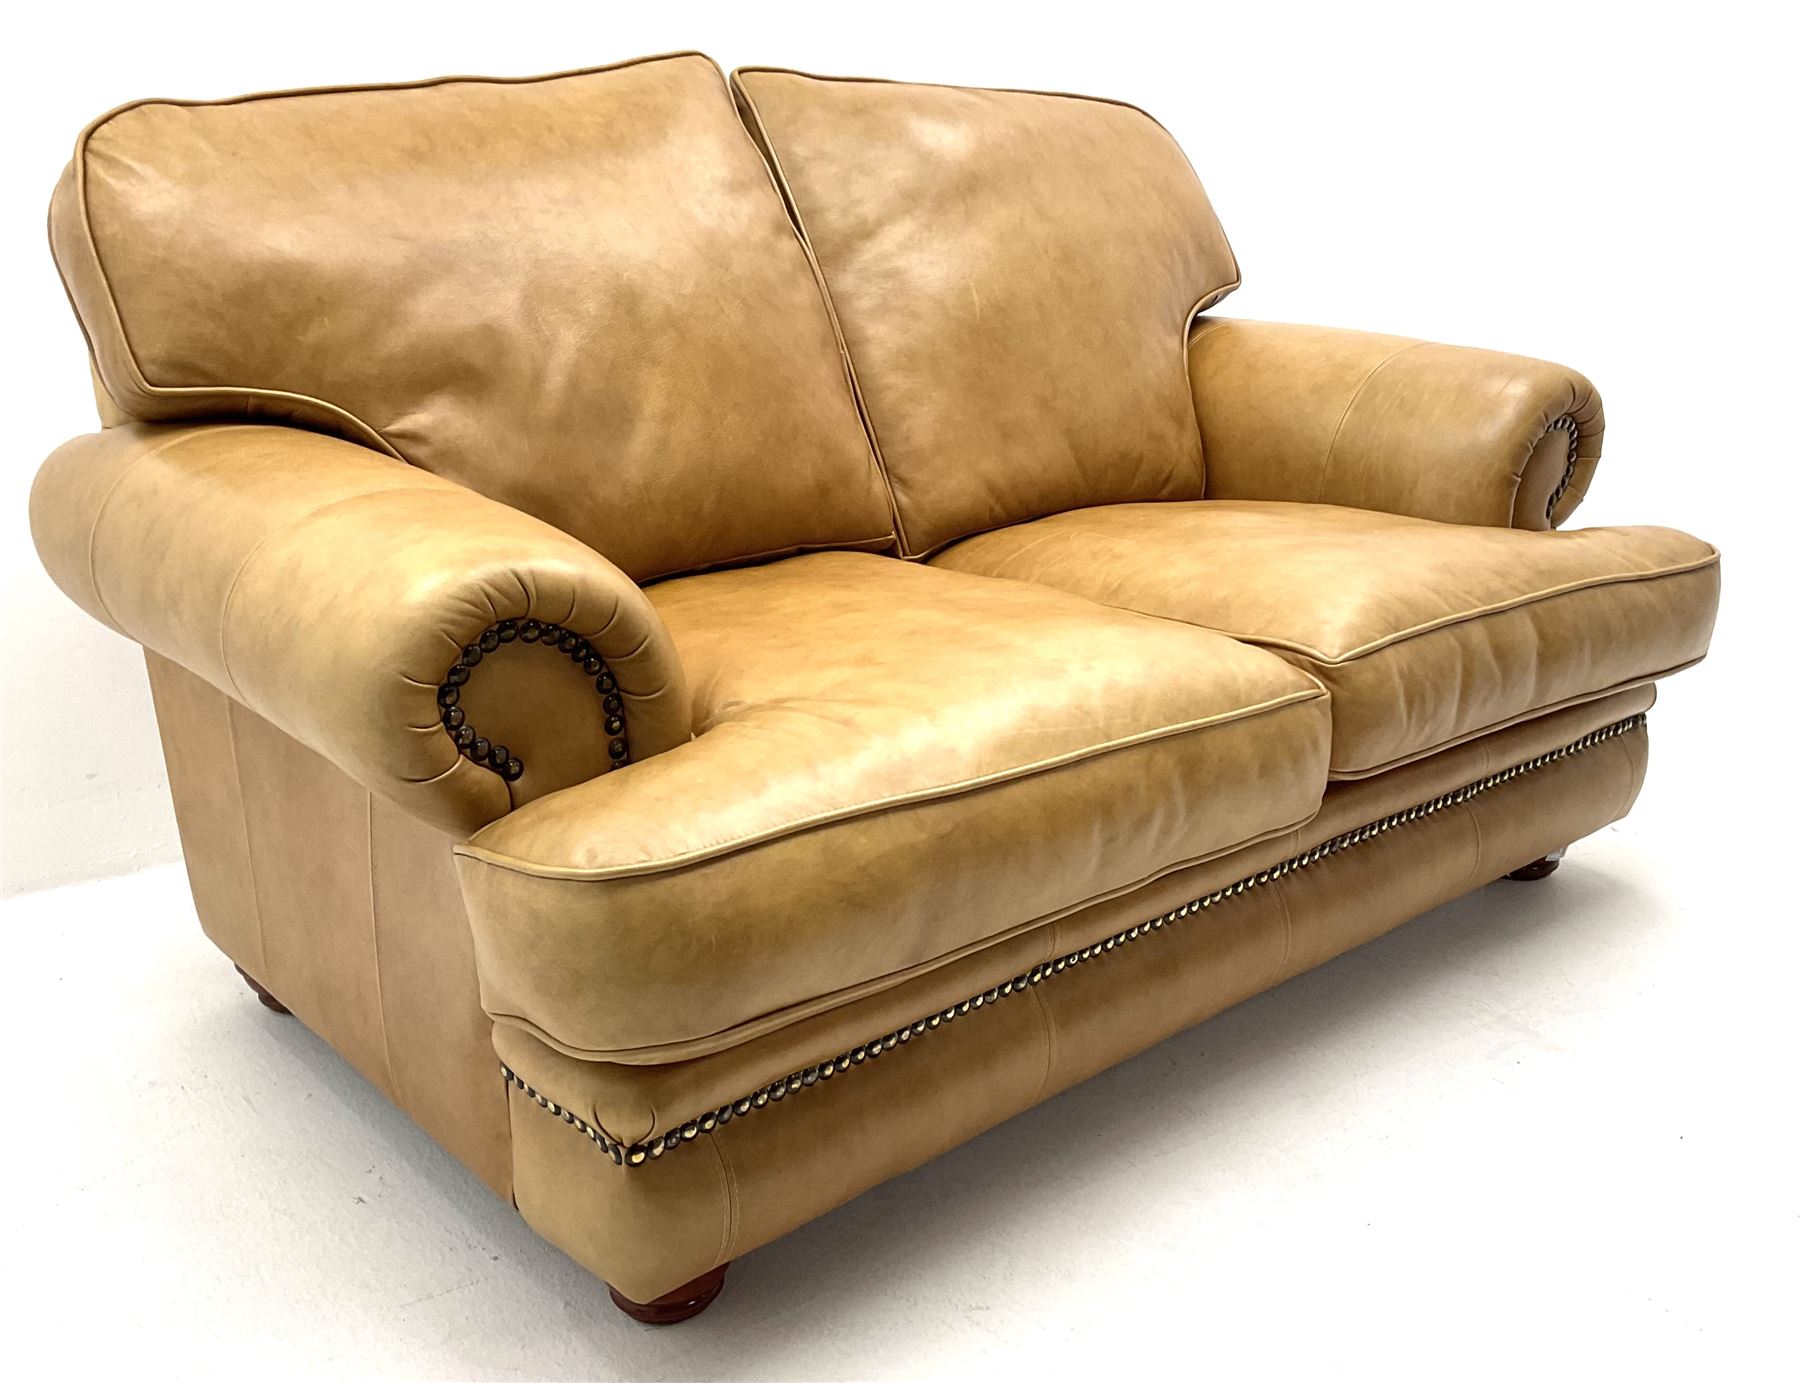 Two seat sofa upholstered in a studded tan leather